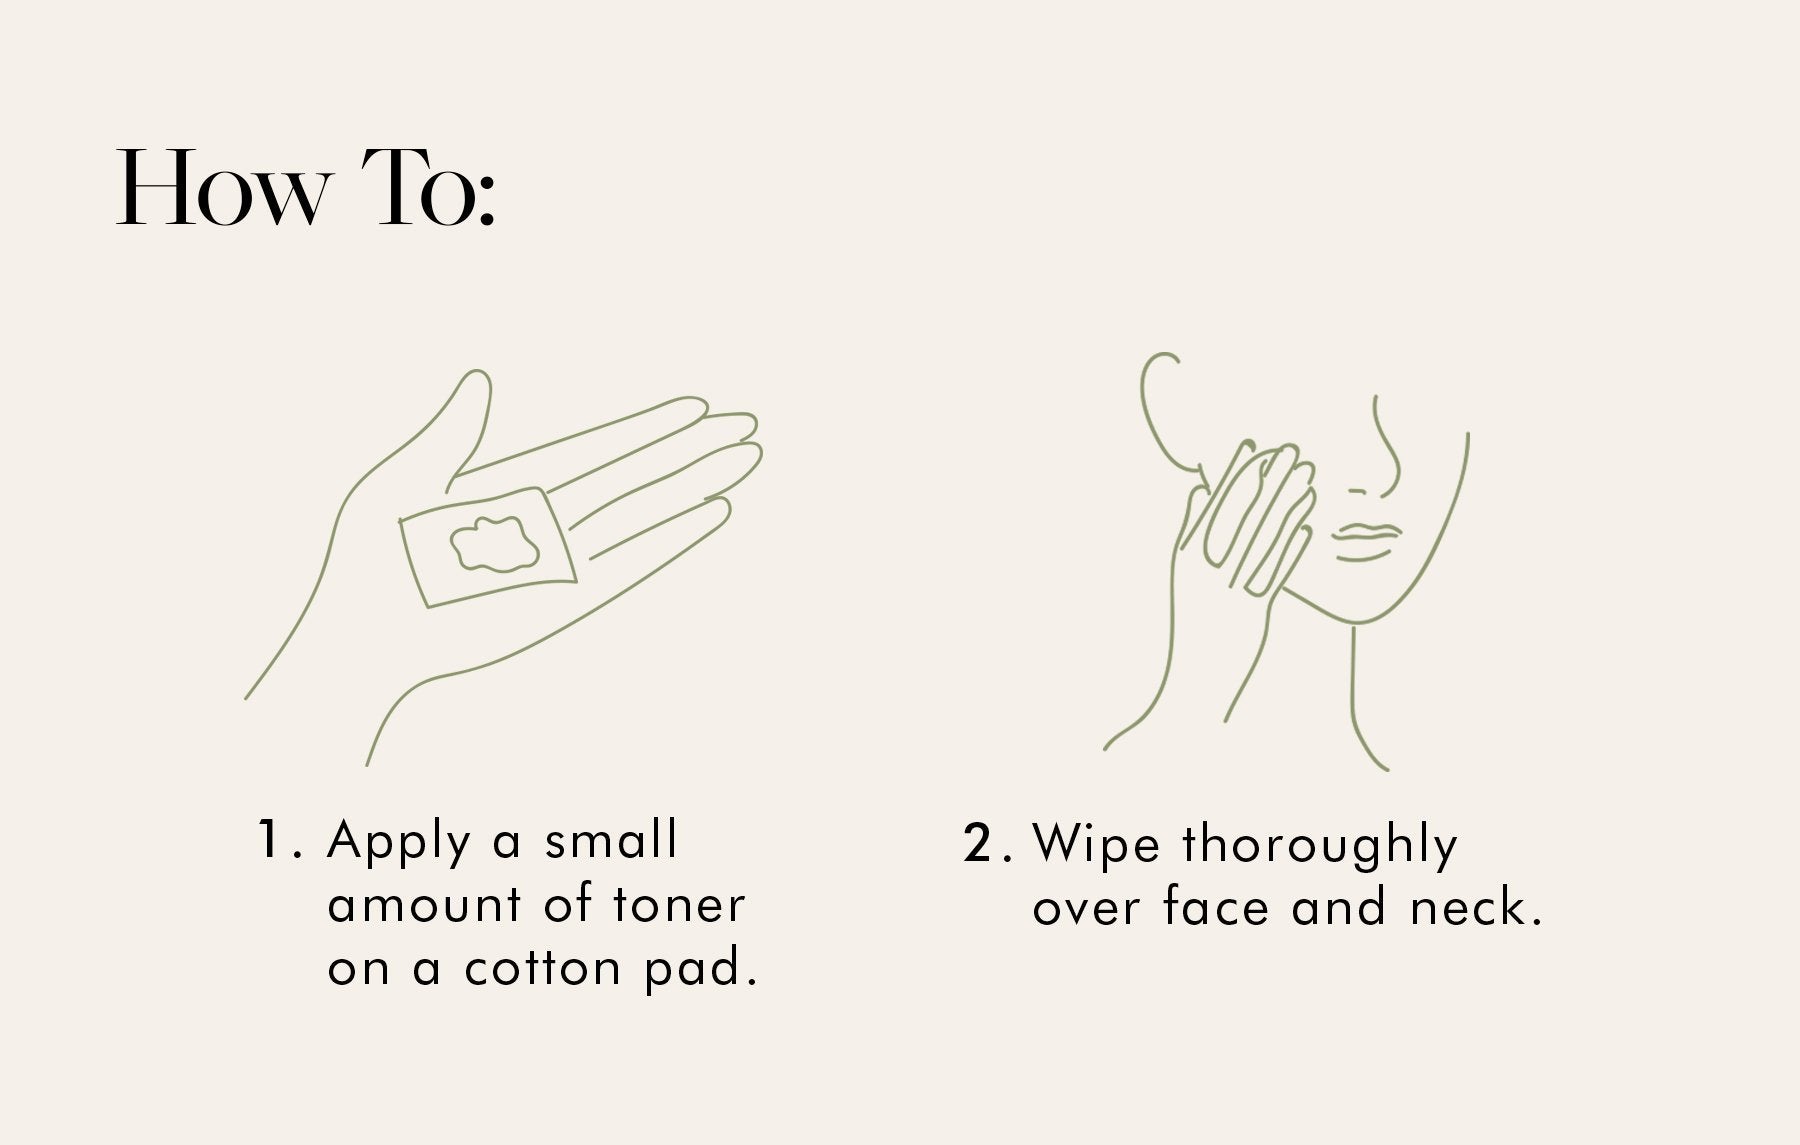 Apply a samll amount of toner on cotton pad an dwipe throroughly over face and neck